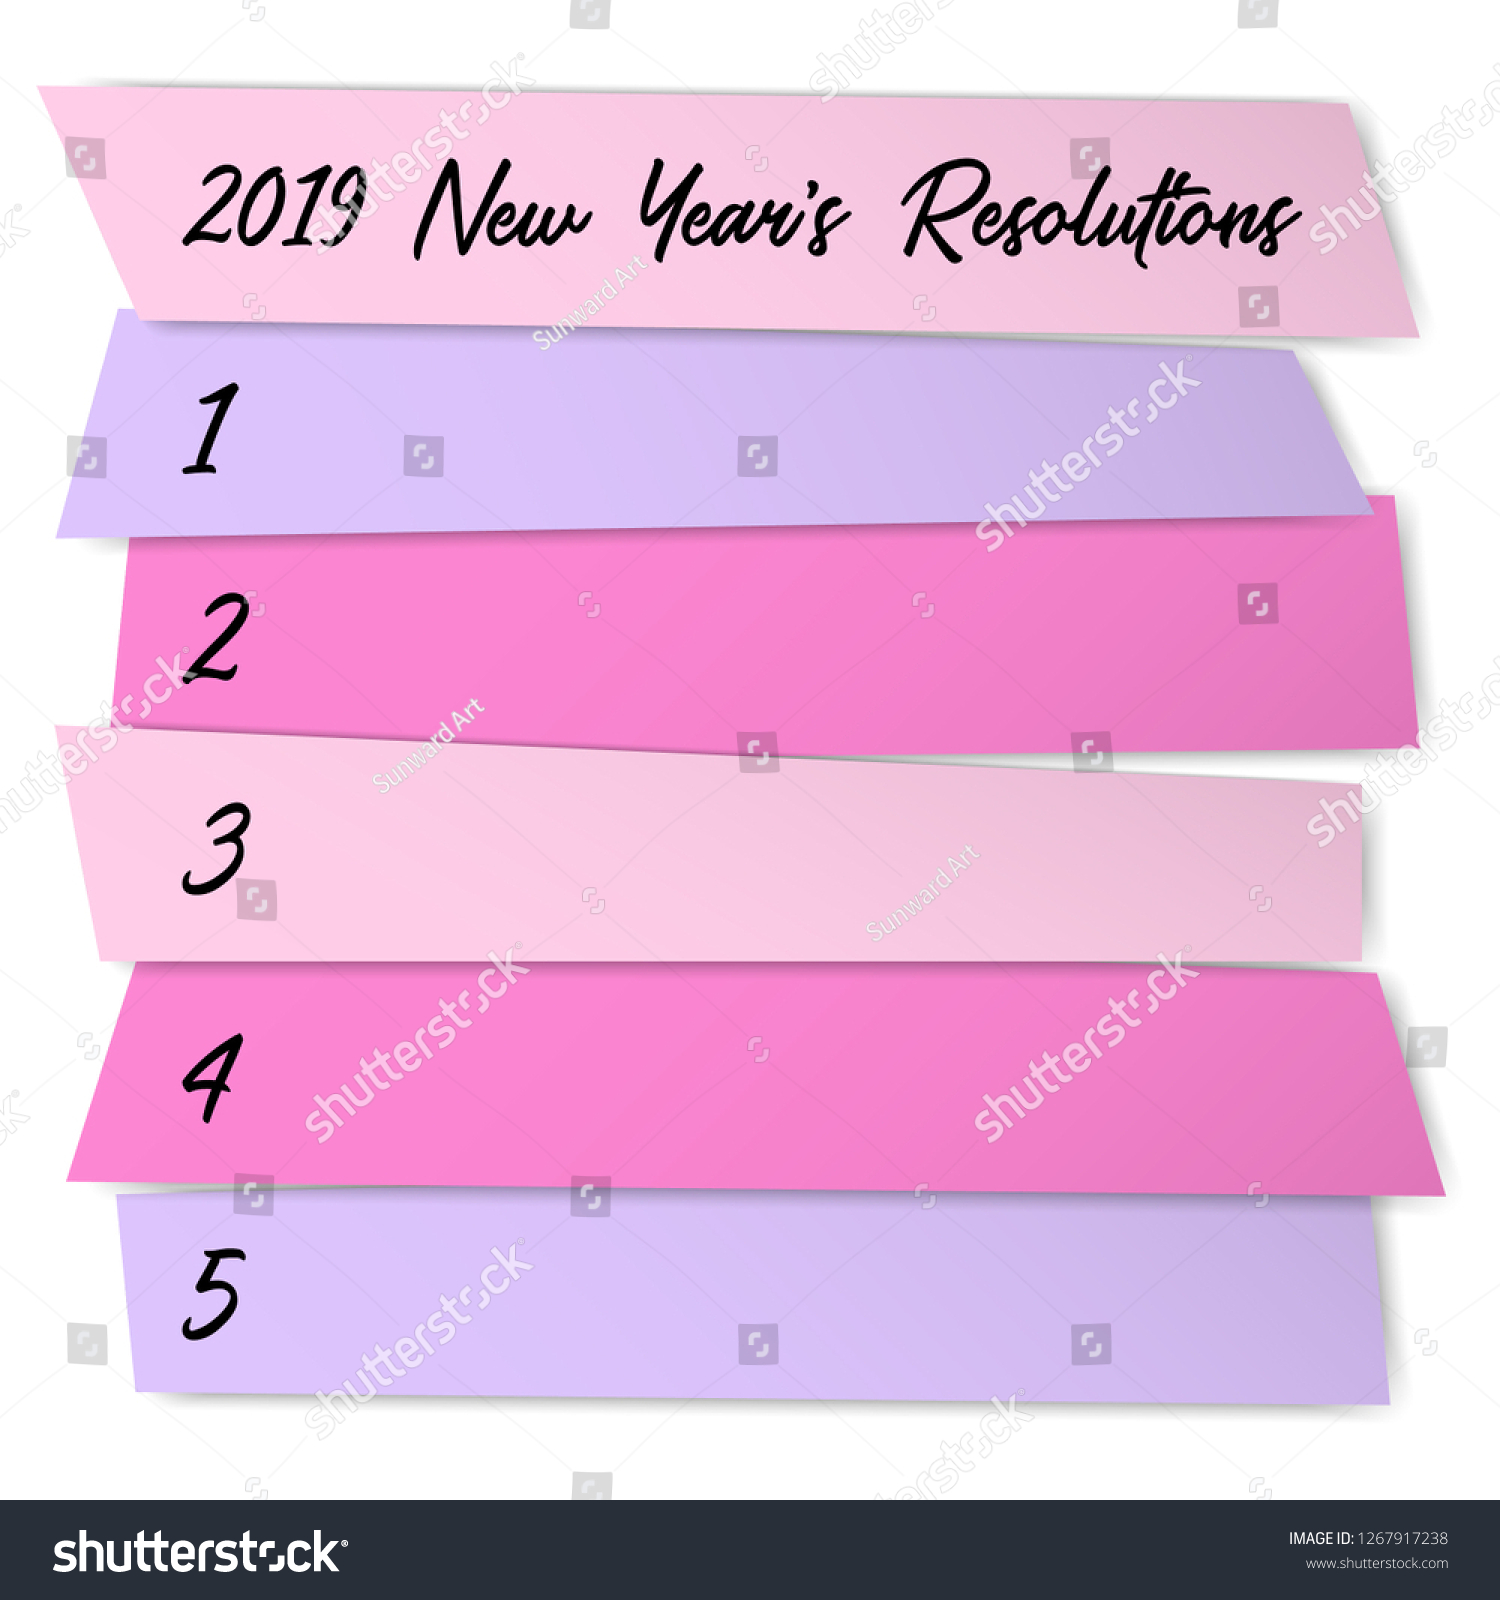 New Year's Resolution List Template from image.shutterstock.com